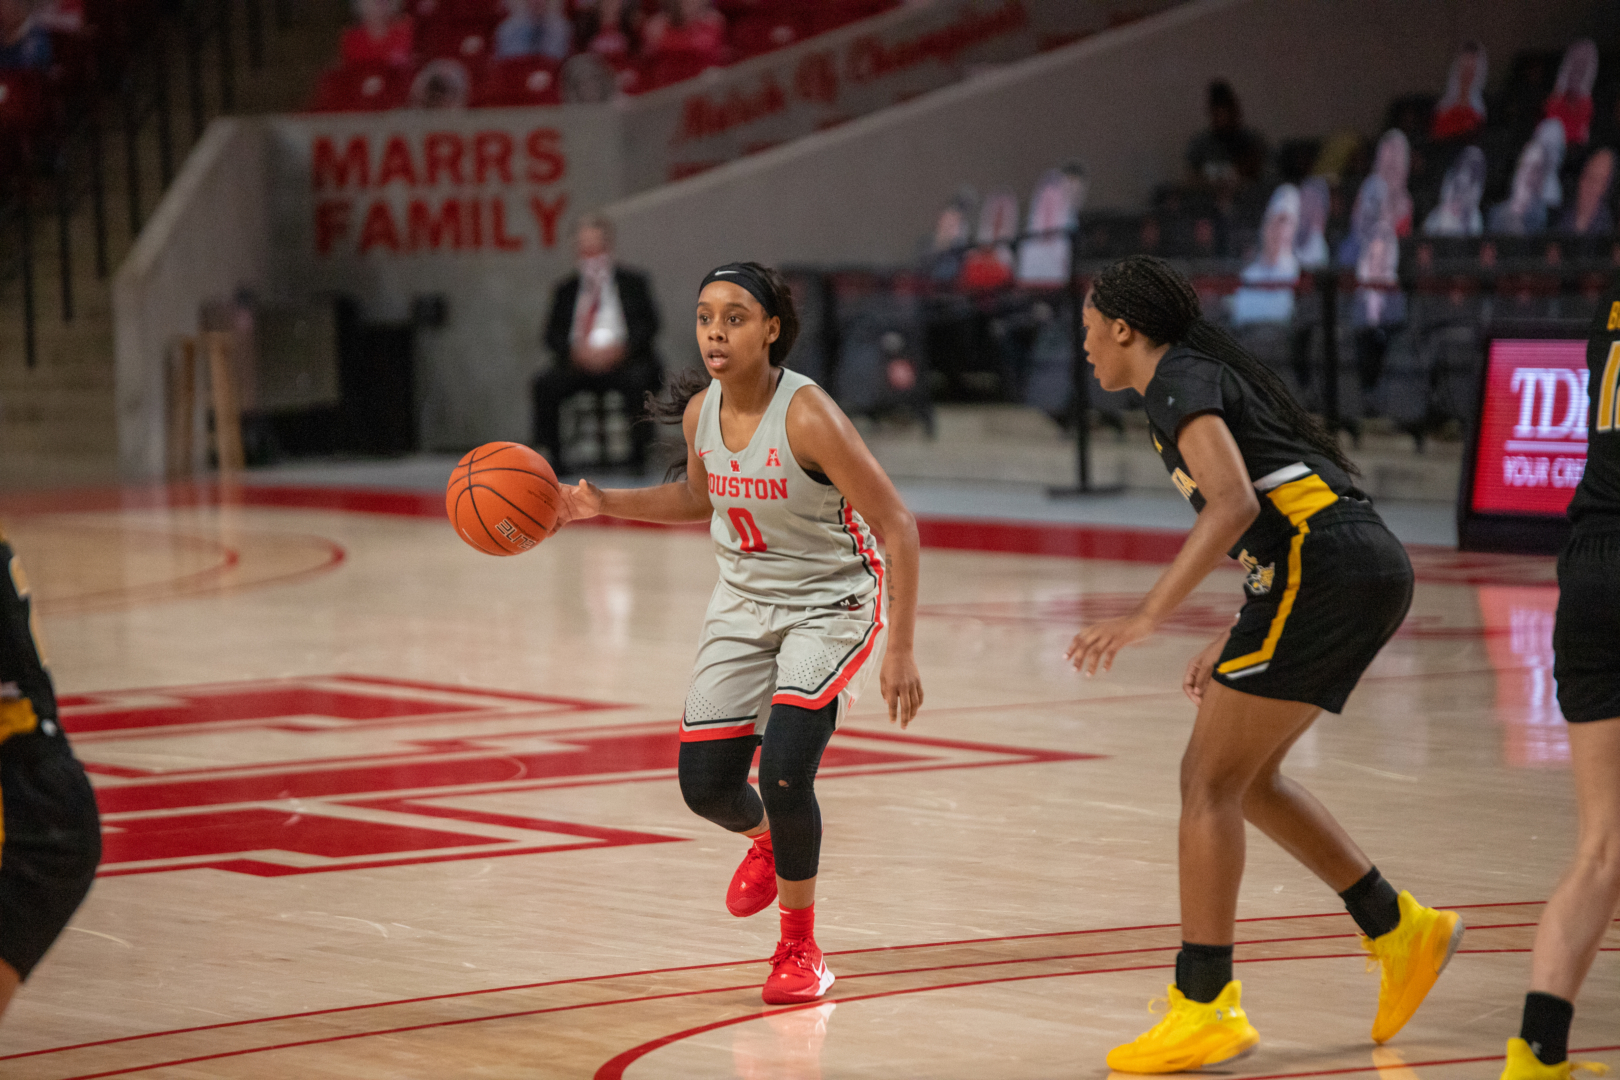 UH fifth-year senior Eryka Sidney brings the ball down the court against Wichita State | Andy Yanez/The Cougar